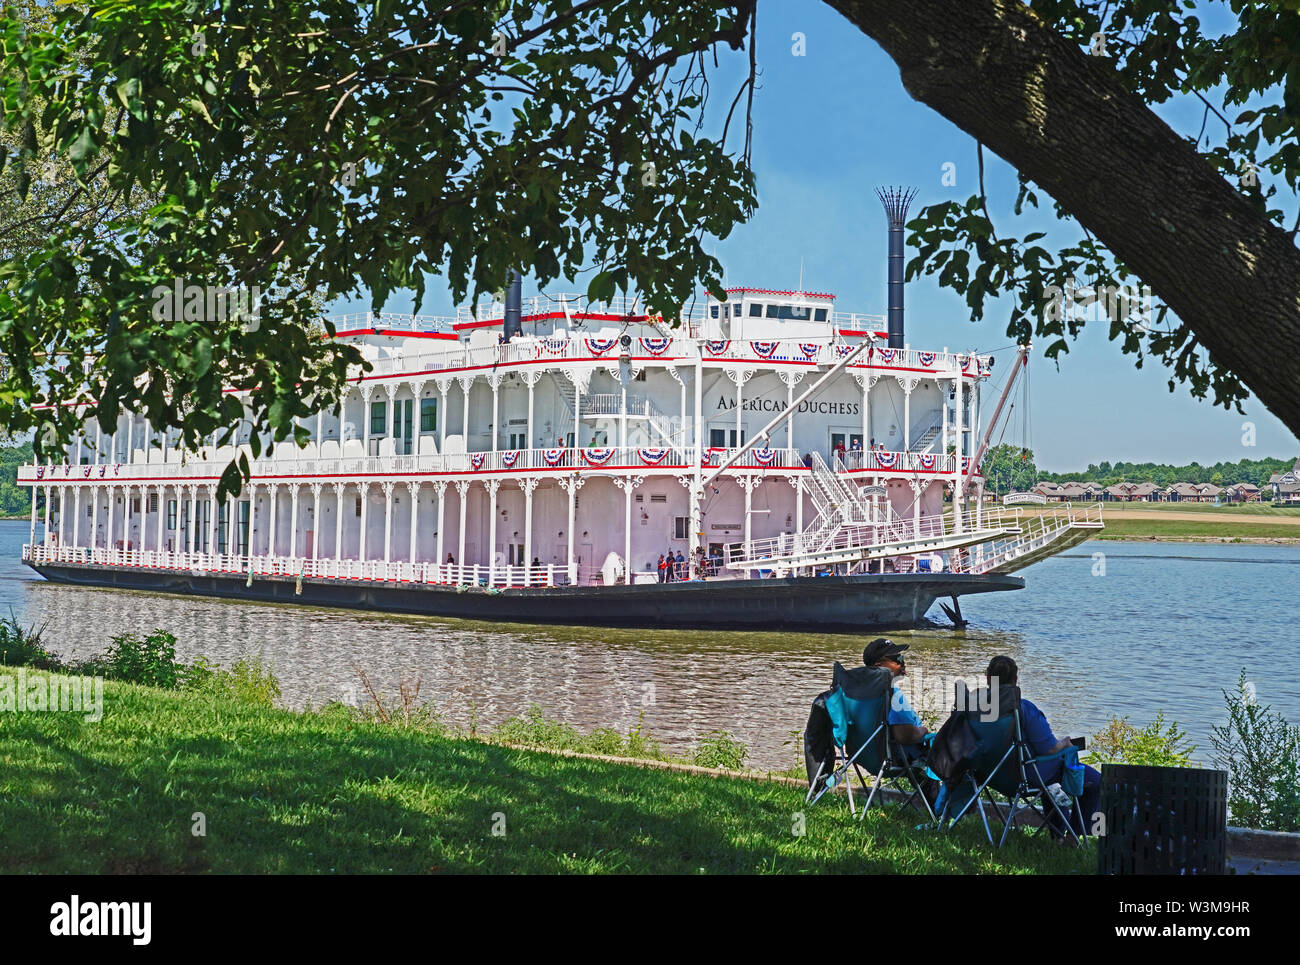 American Duchess stern wheel riverboat of the American Queen Steamboat Company on Ohio River at Louisville, Kentucky. Stock Photo